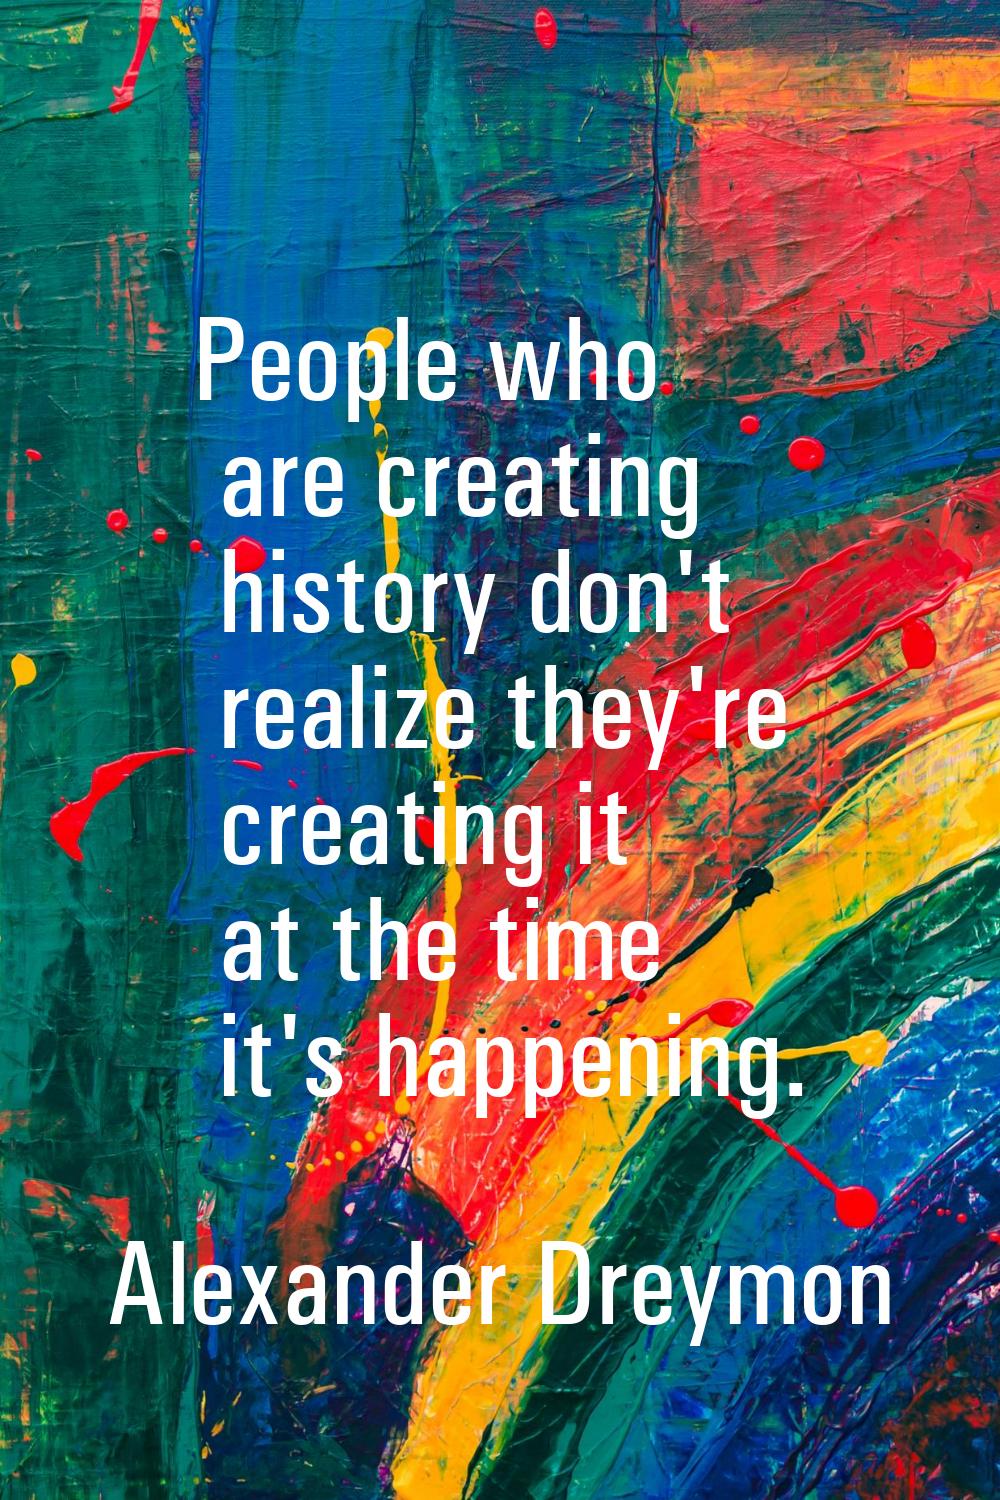 People who are creating history don't realize they're creating it at the time it's happening.